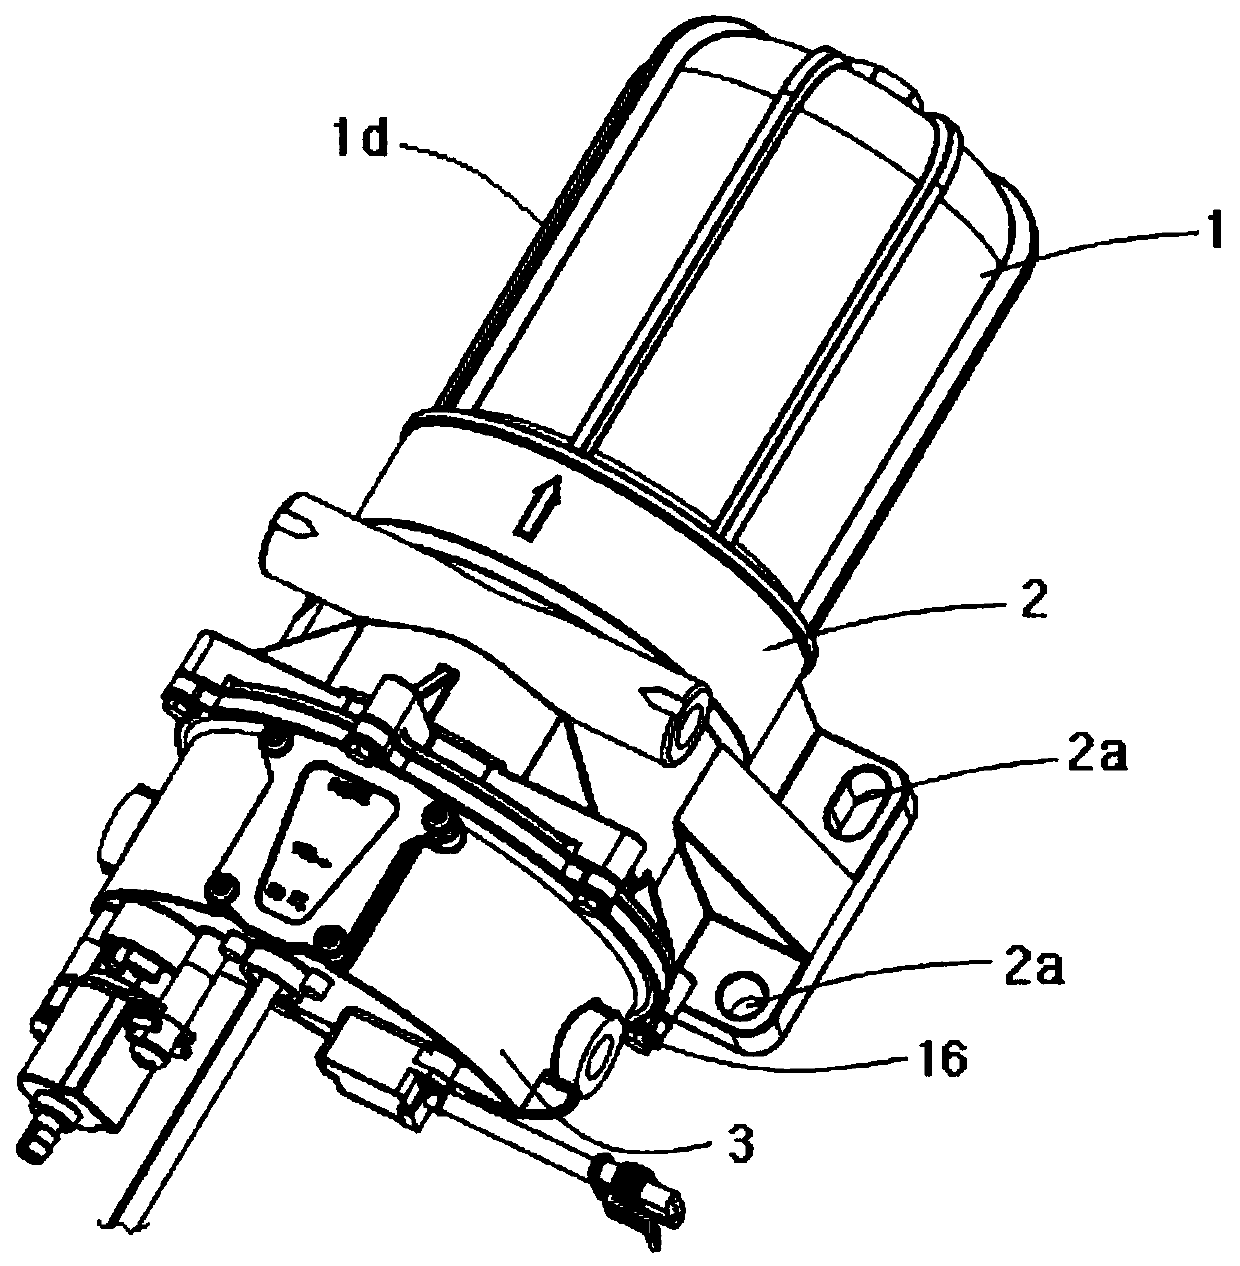 Automatic emptying device for fuel oil